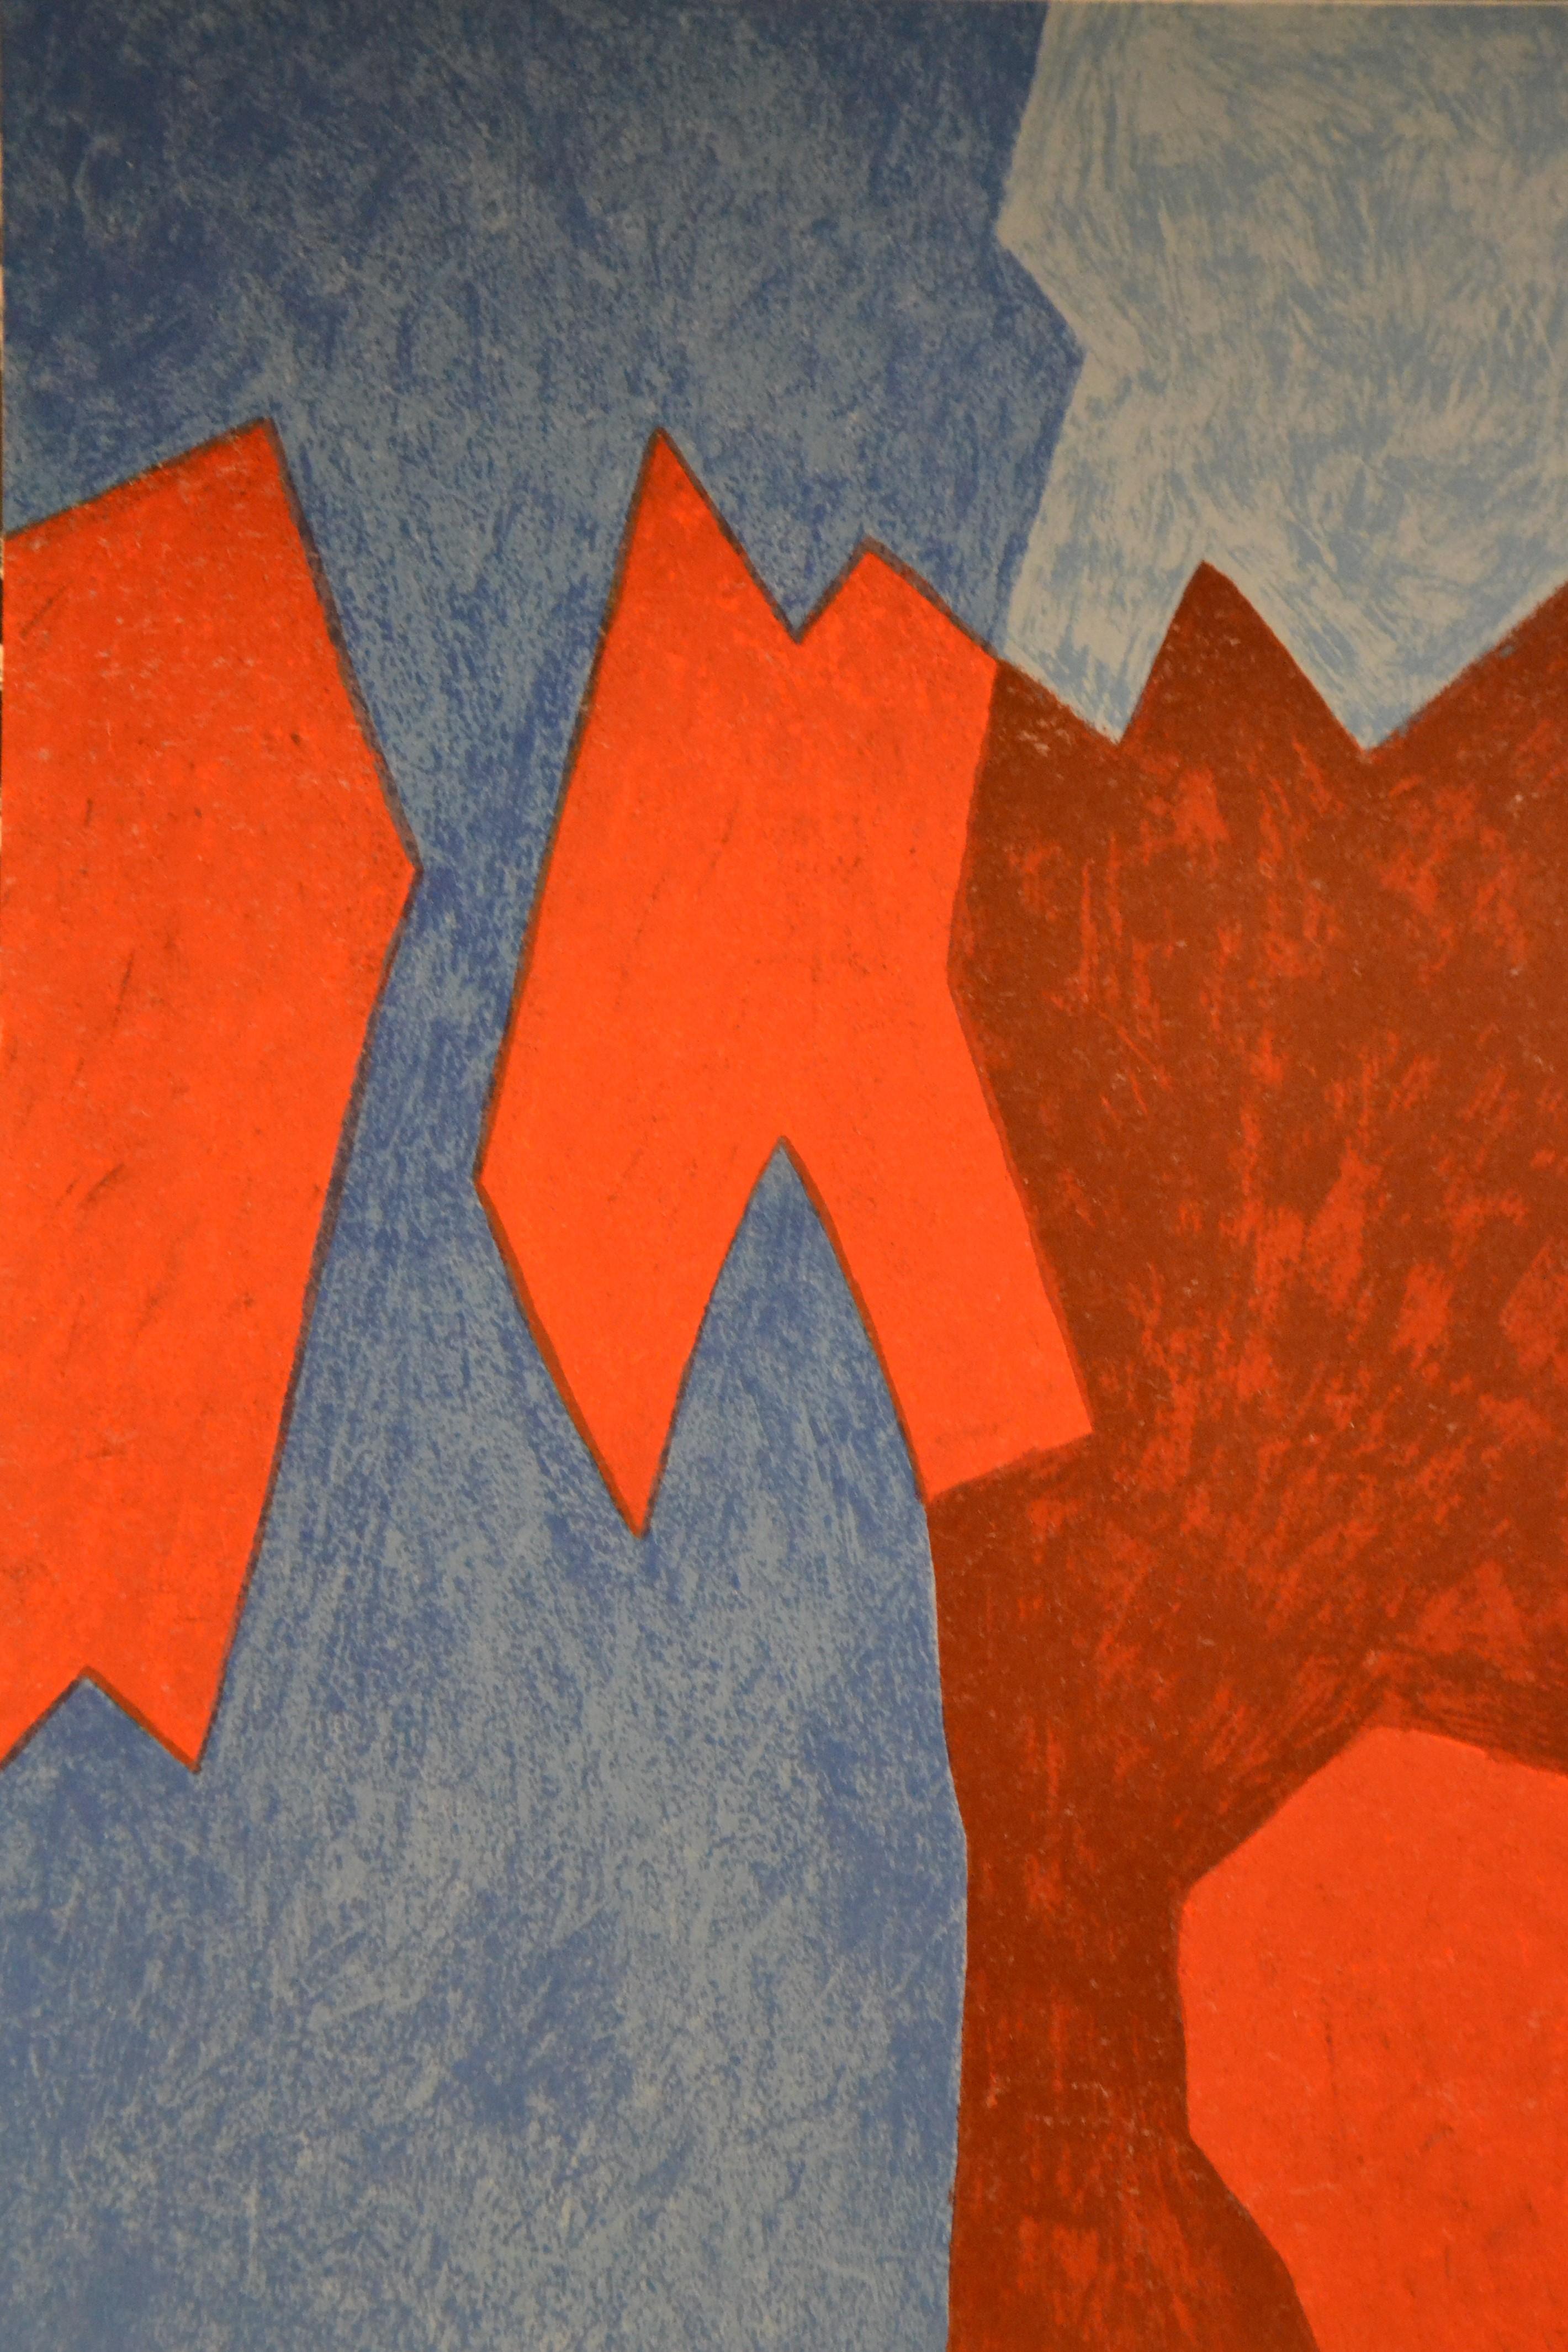 Blue And Red Composition   - Original Lithograph by Serge Poliakoff - 1968 3